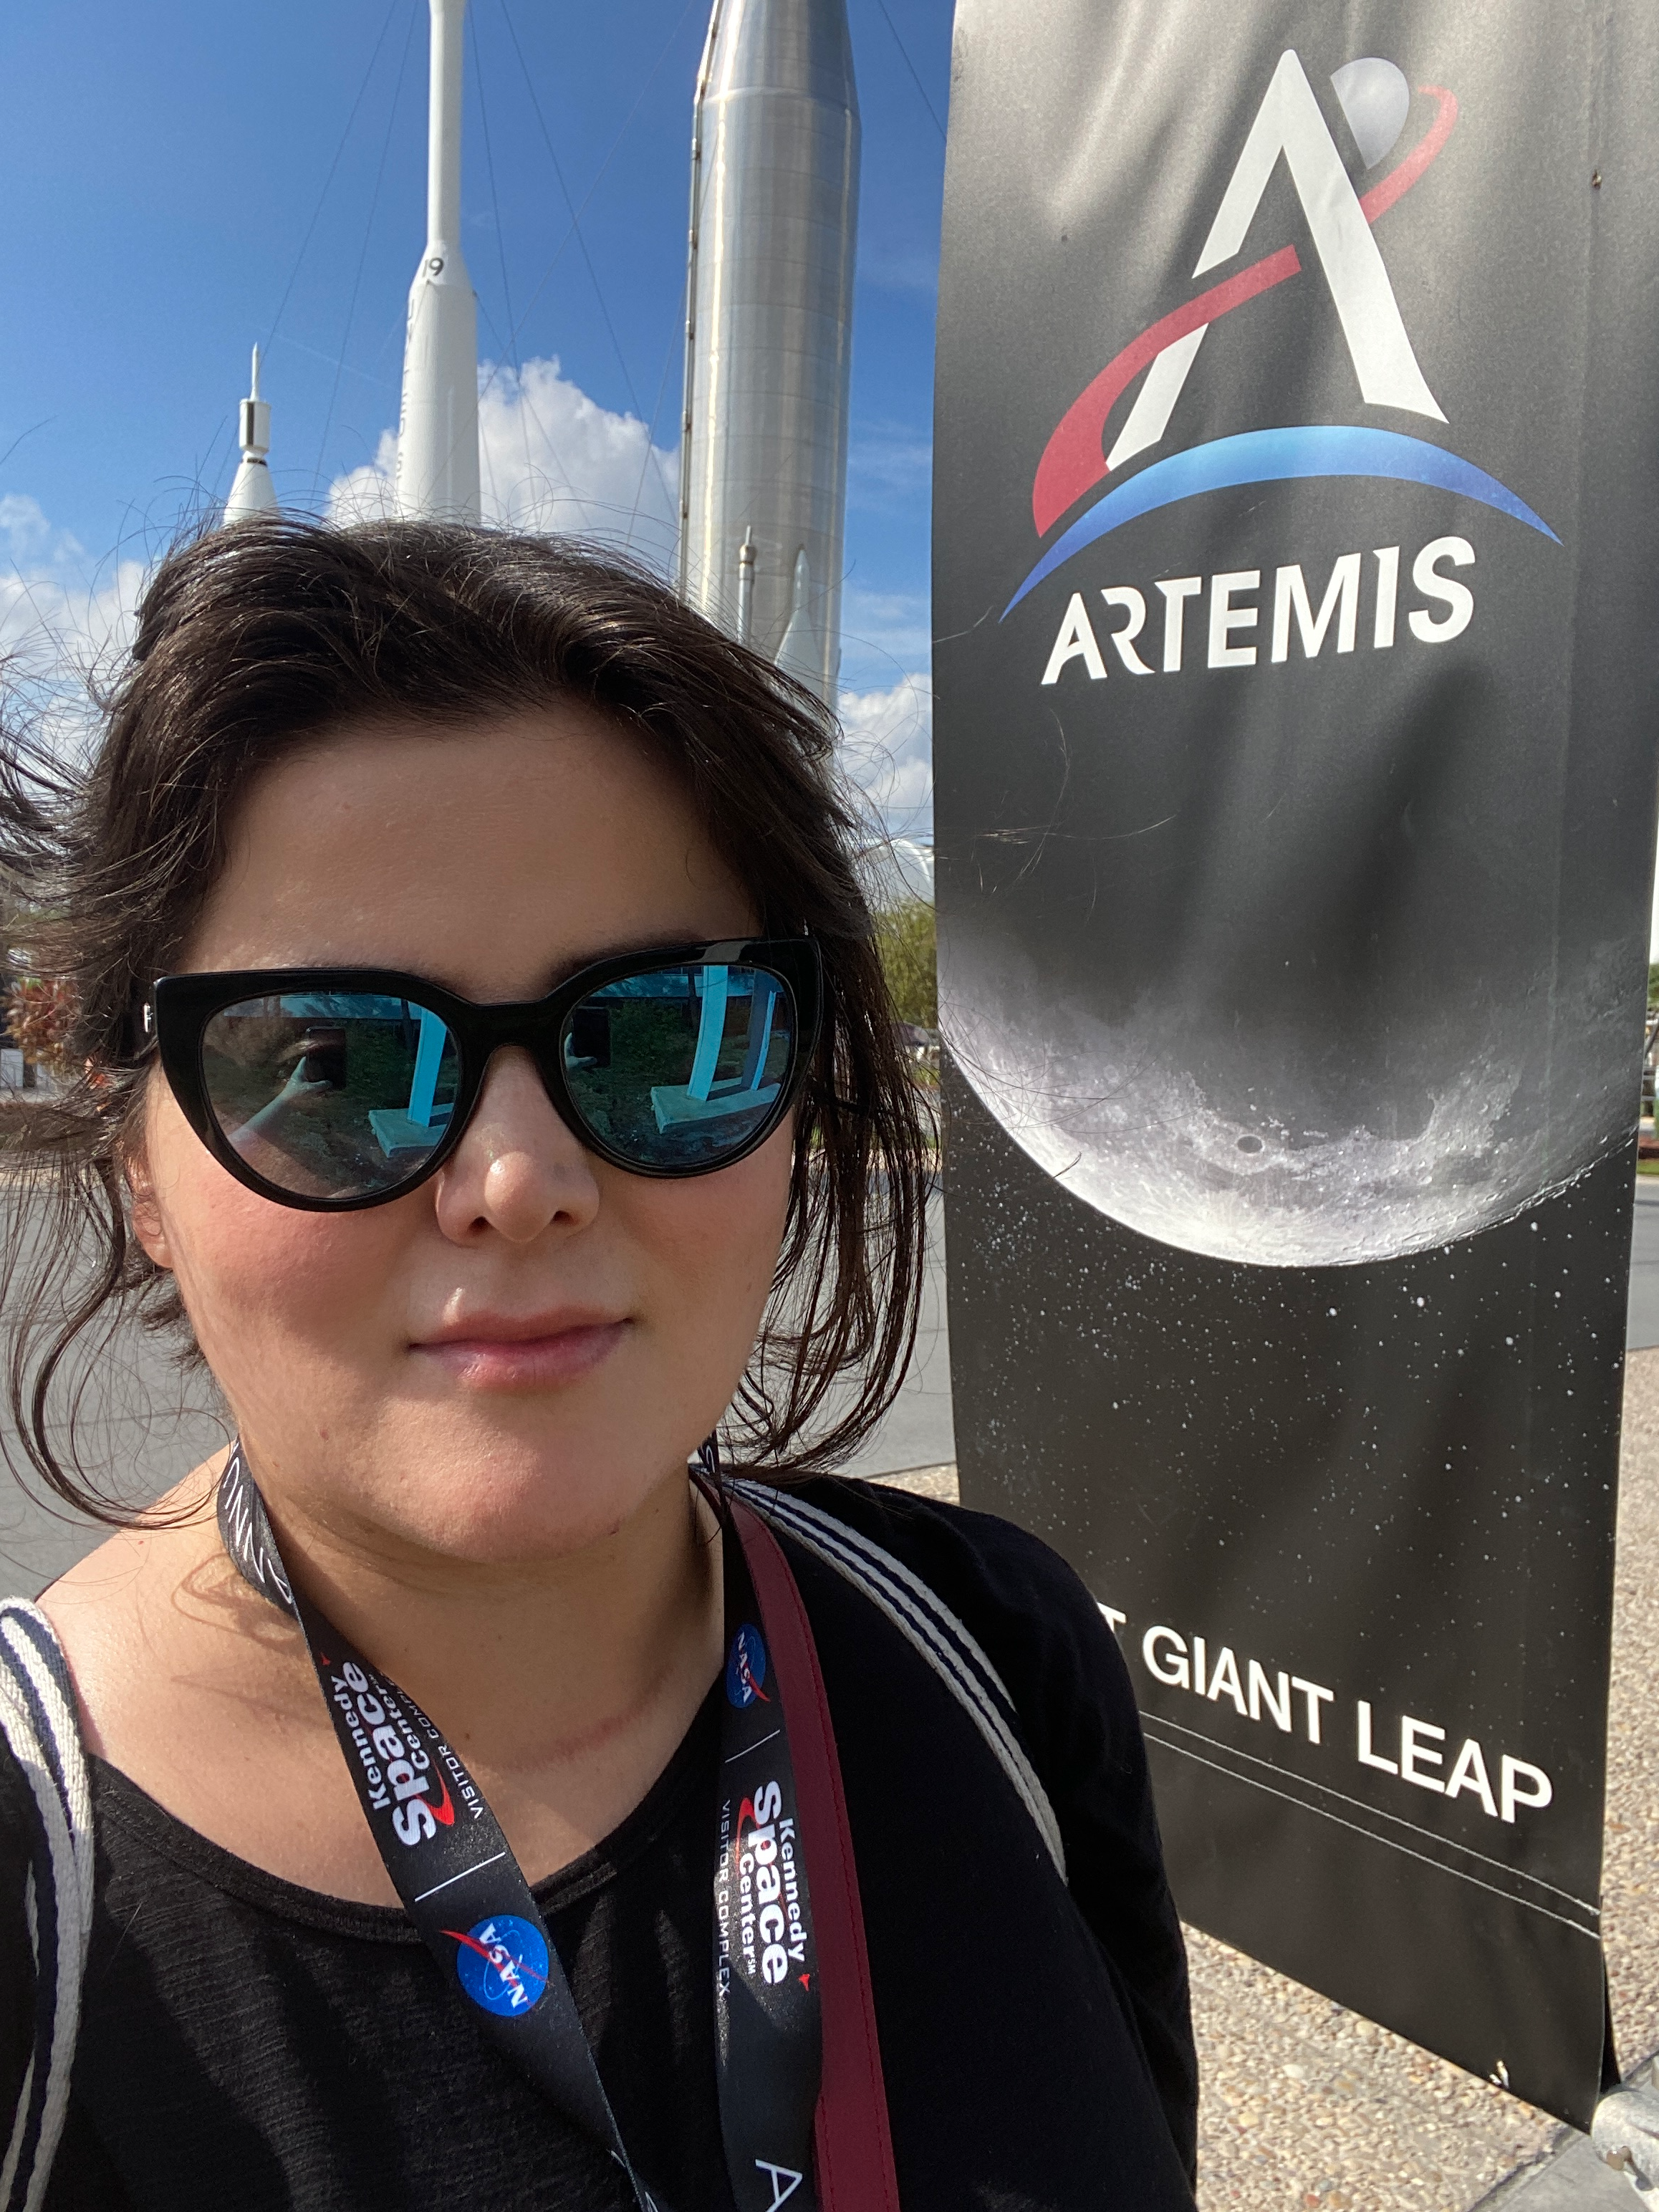 Artemis I post-launch. Location: NASA Kennedy Space Center Visitor’s Complex. November 16, 2022. Untouched photos, no edits. (Credits: Monica Hernandez)